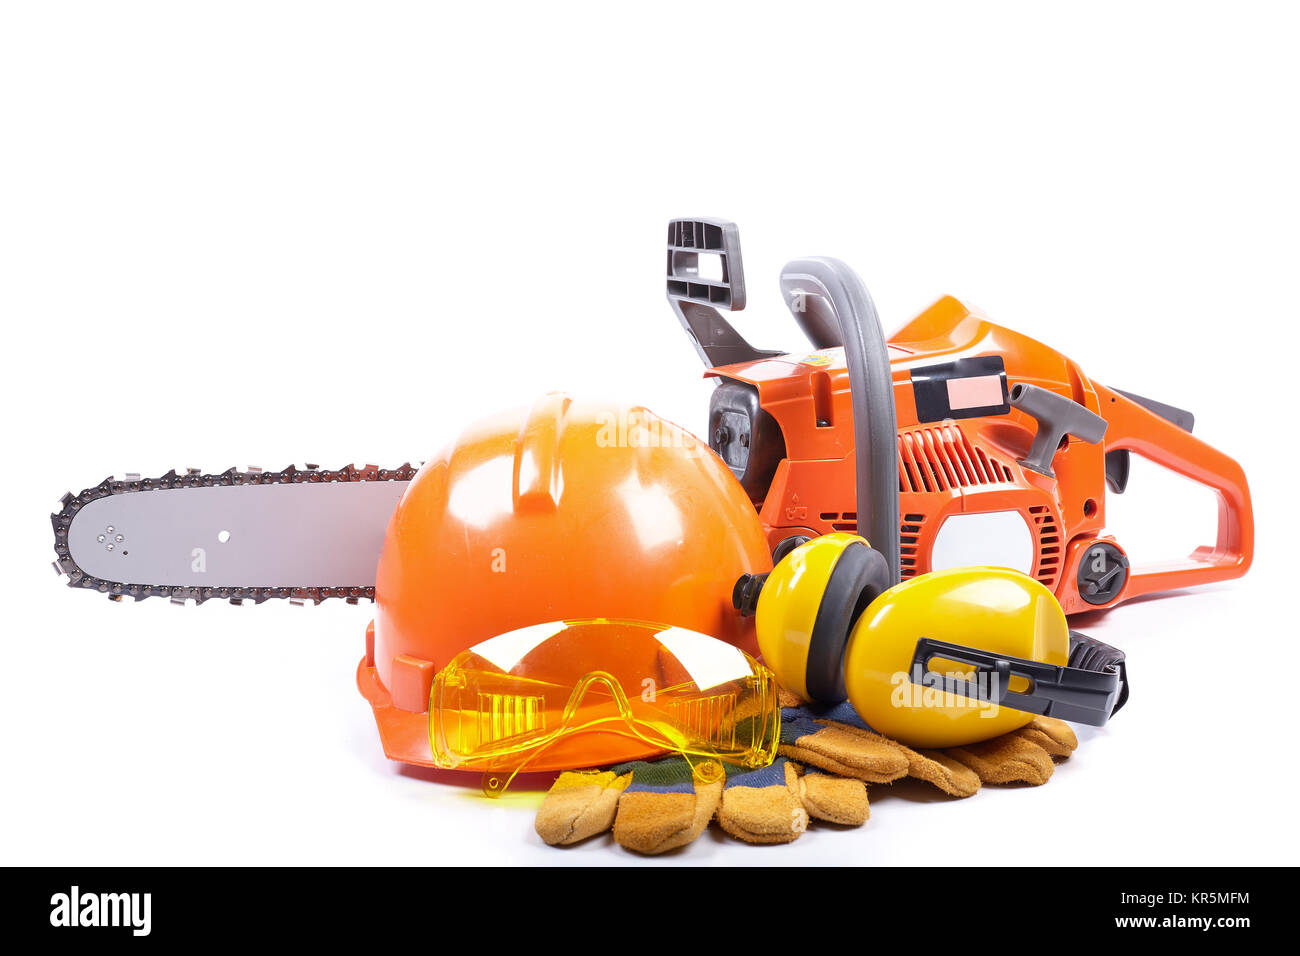 Chain saw and protective clothes. Stock Photo